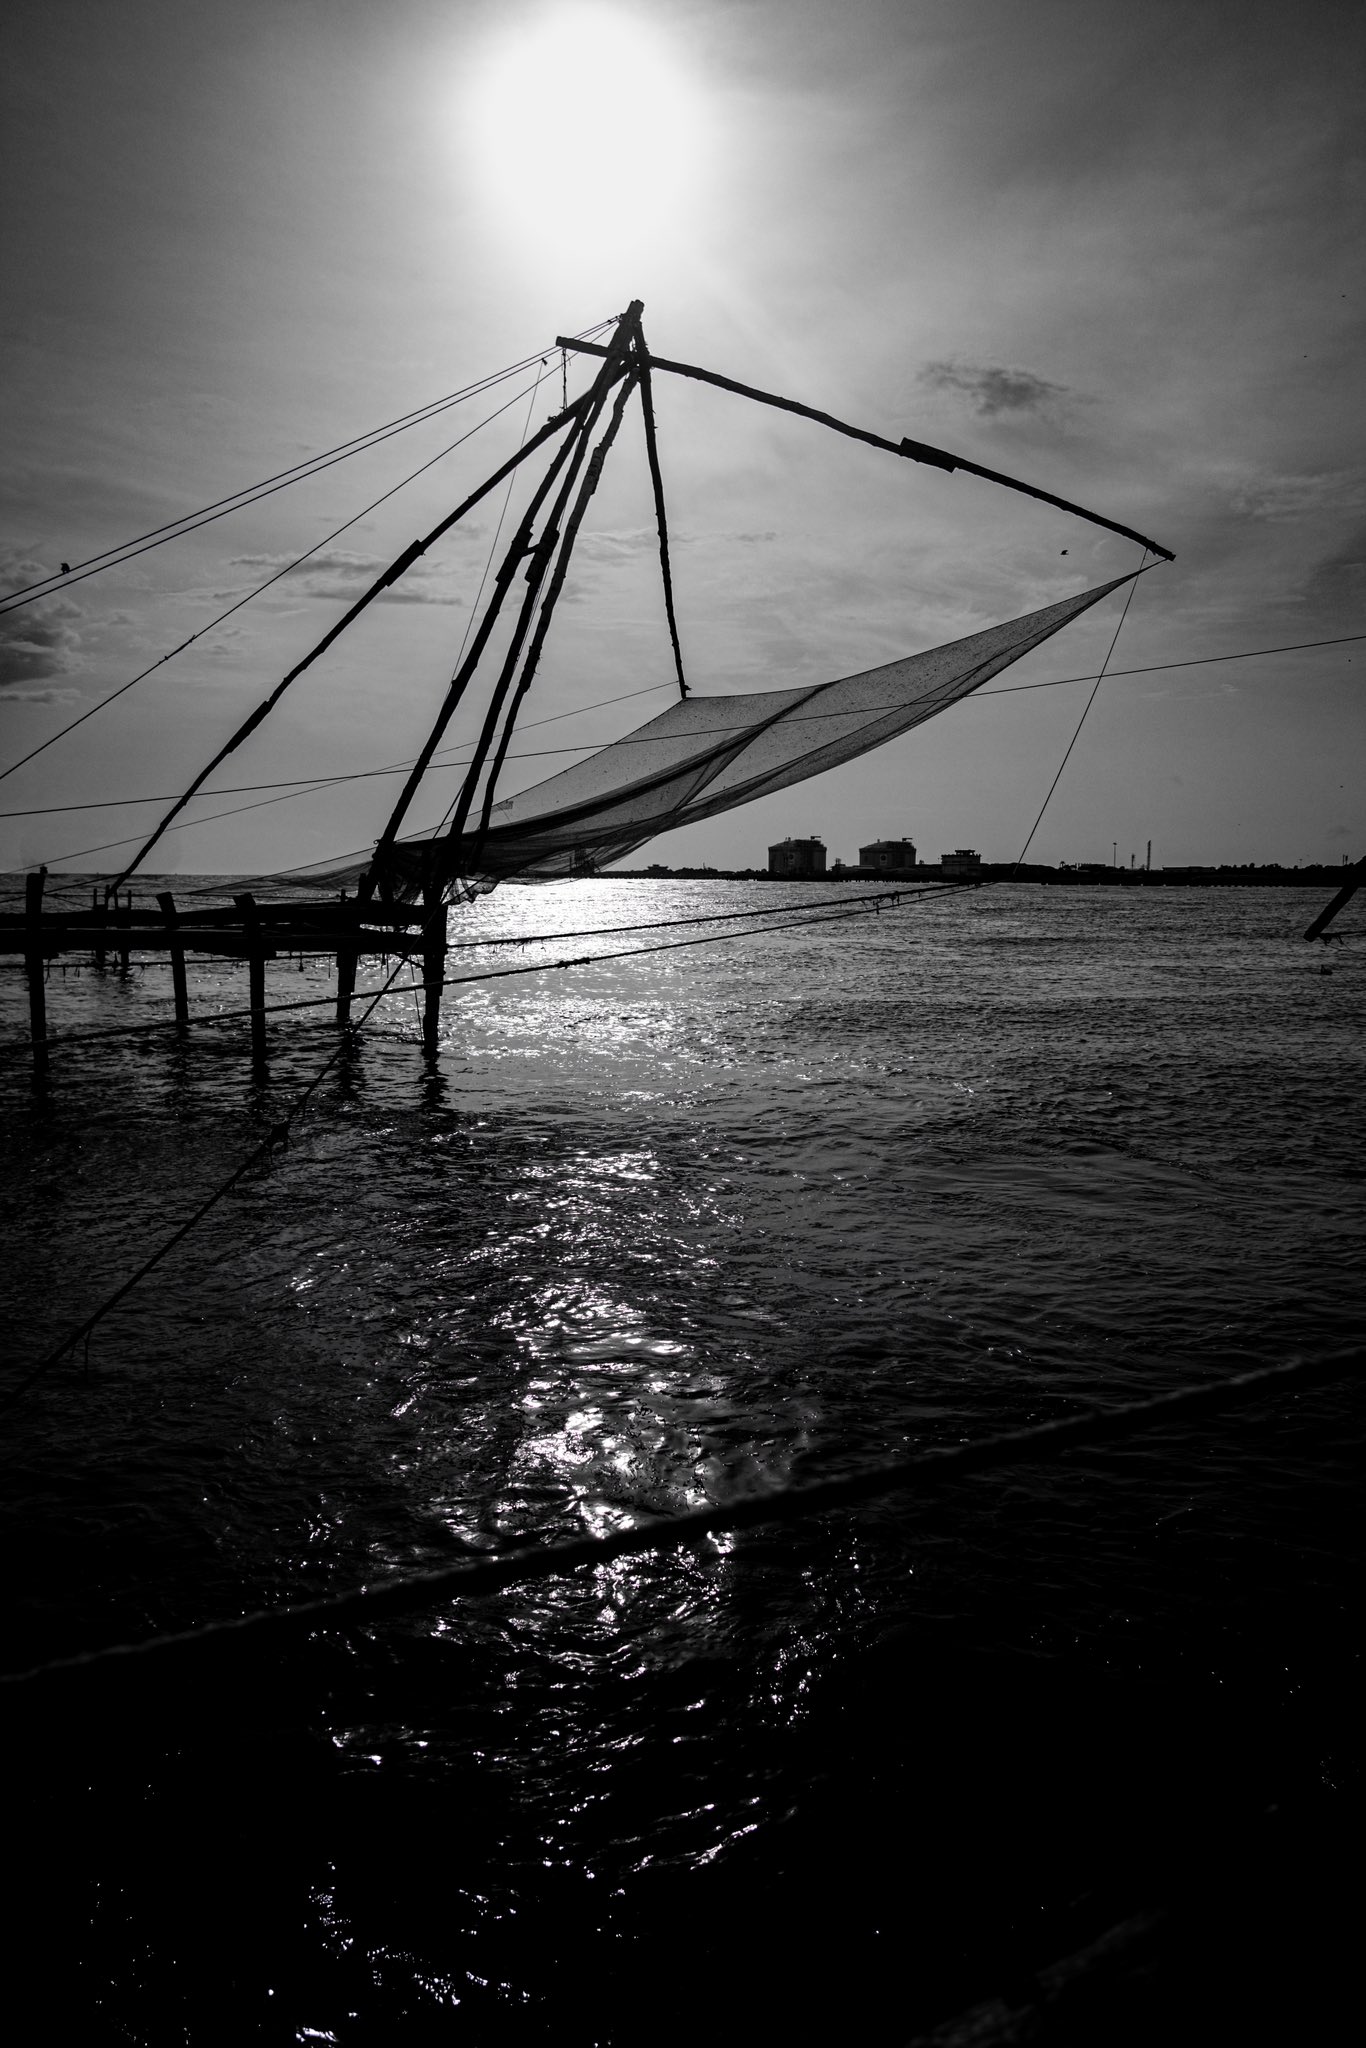 idlebrain jeevi on X: Fort Kochi: These Chinese fishing nets were  introduced by a Chinese explorer in 1350 and 1450 from the court of Kublai  Khan (Mongolian Emperor). I shot these photos